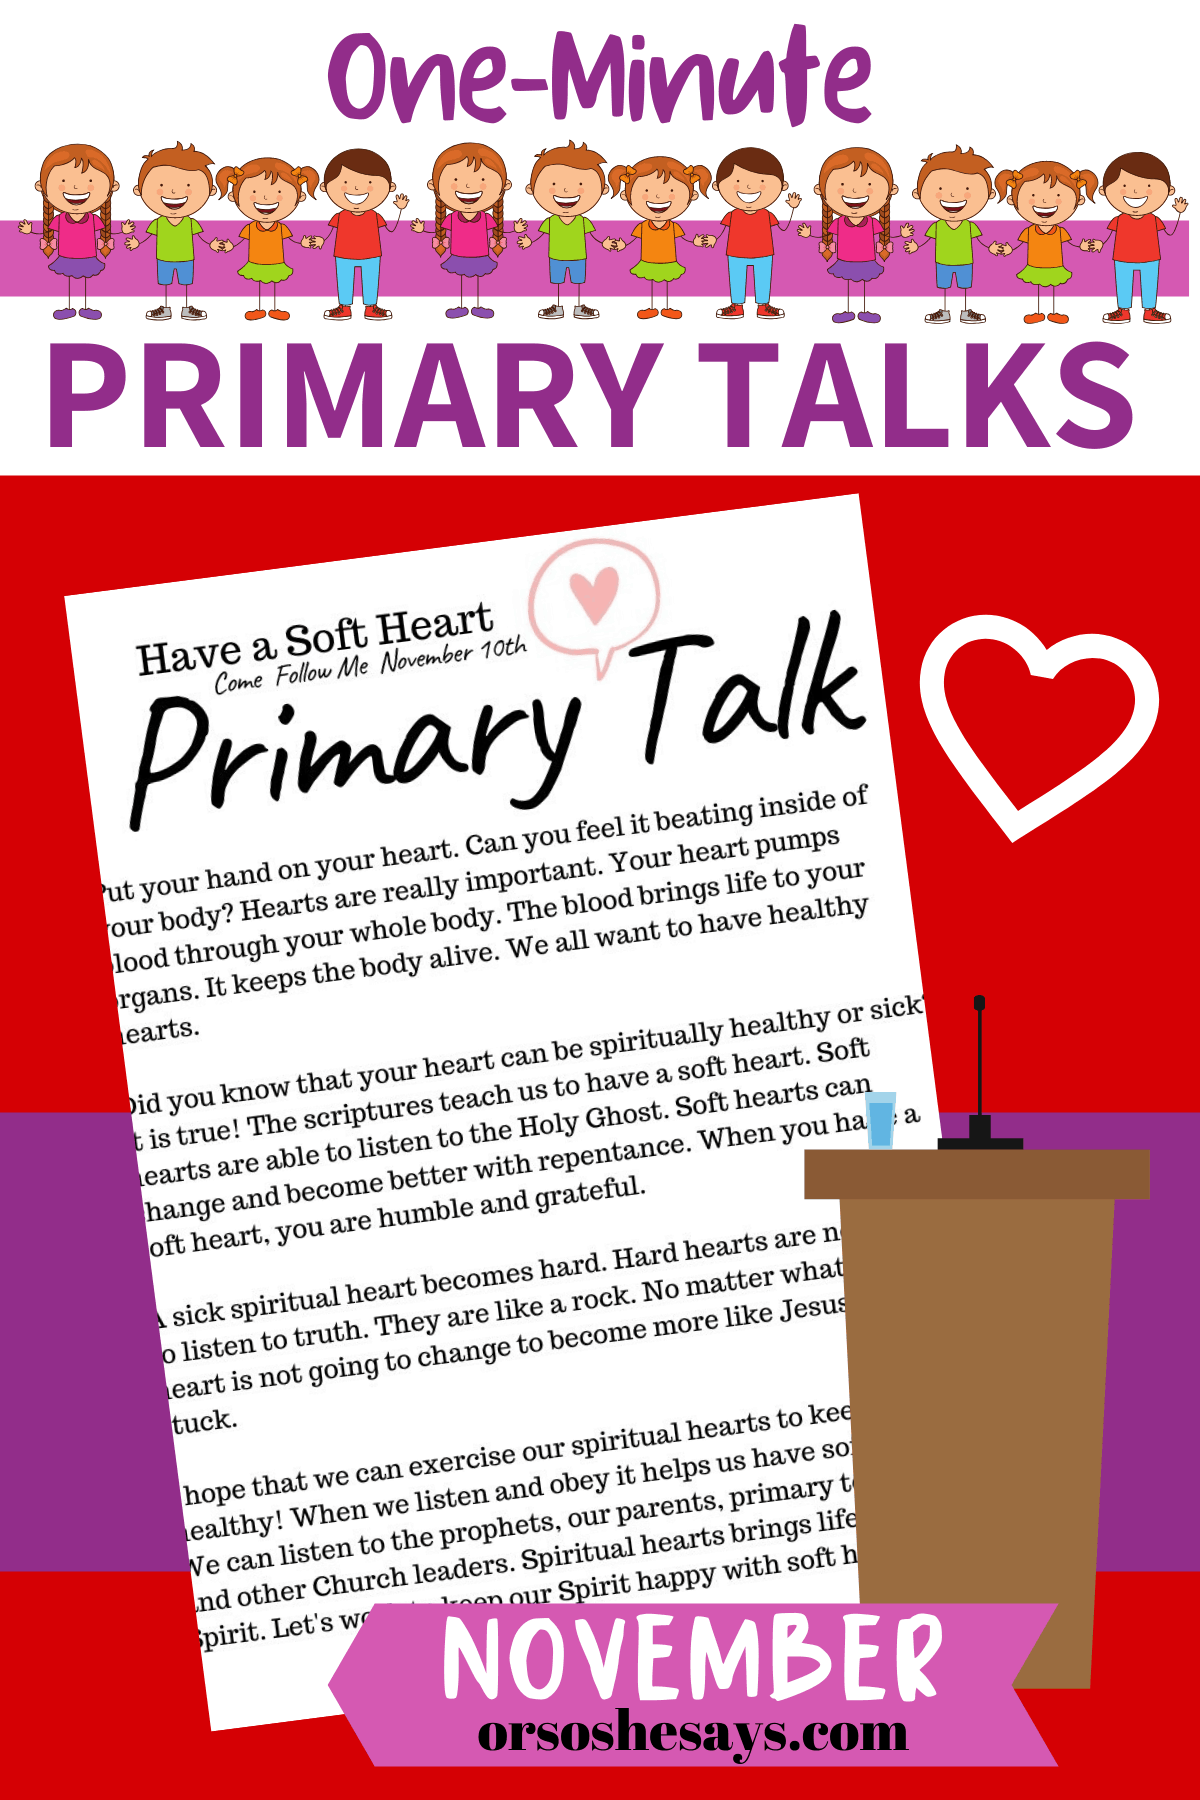 Come Follow Me Primary Talks for November 2019 Or so she says...